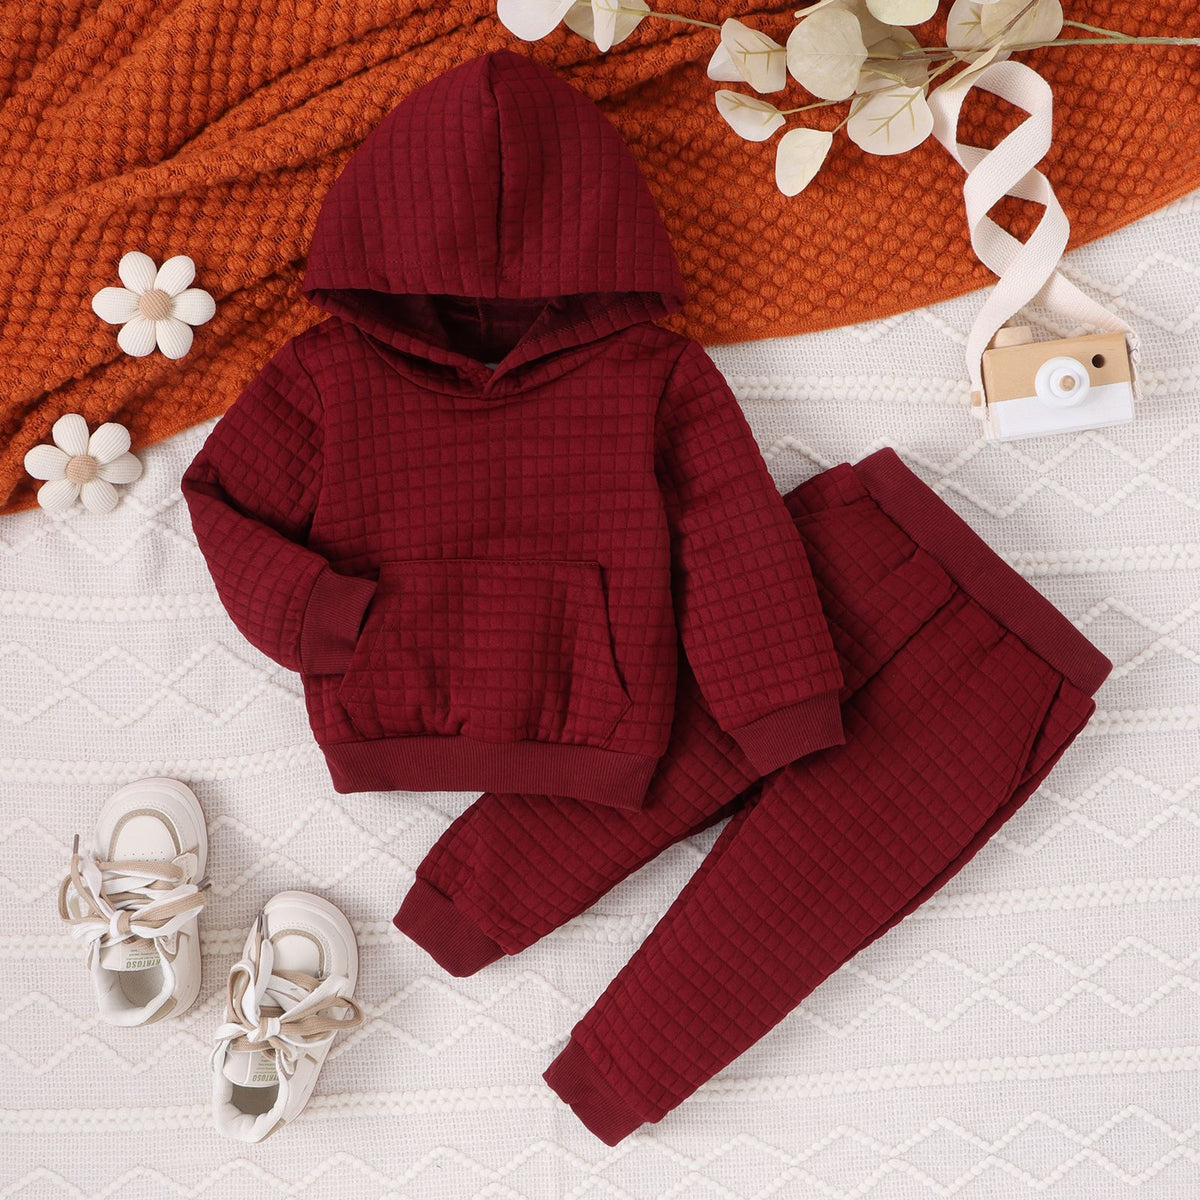 2 Pieces Set Baby Kid Girls Boys Solid Color Hoodies Sweatshirts And Pants Wholesale 24011138